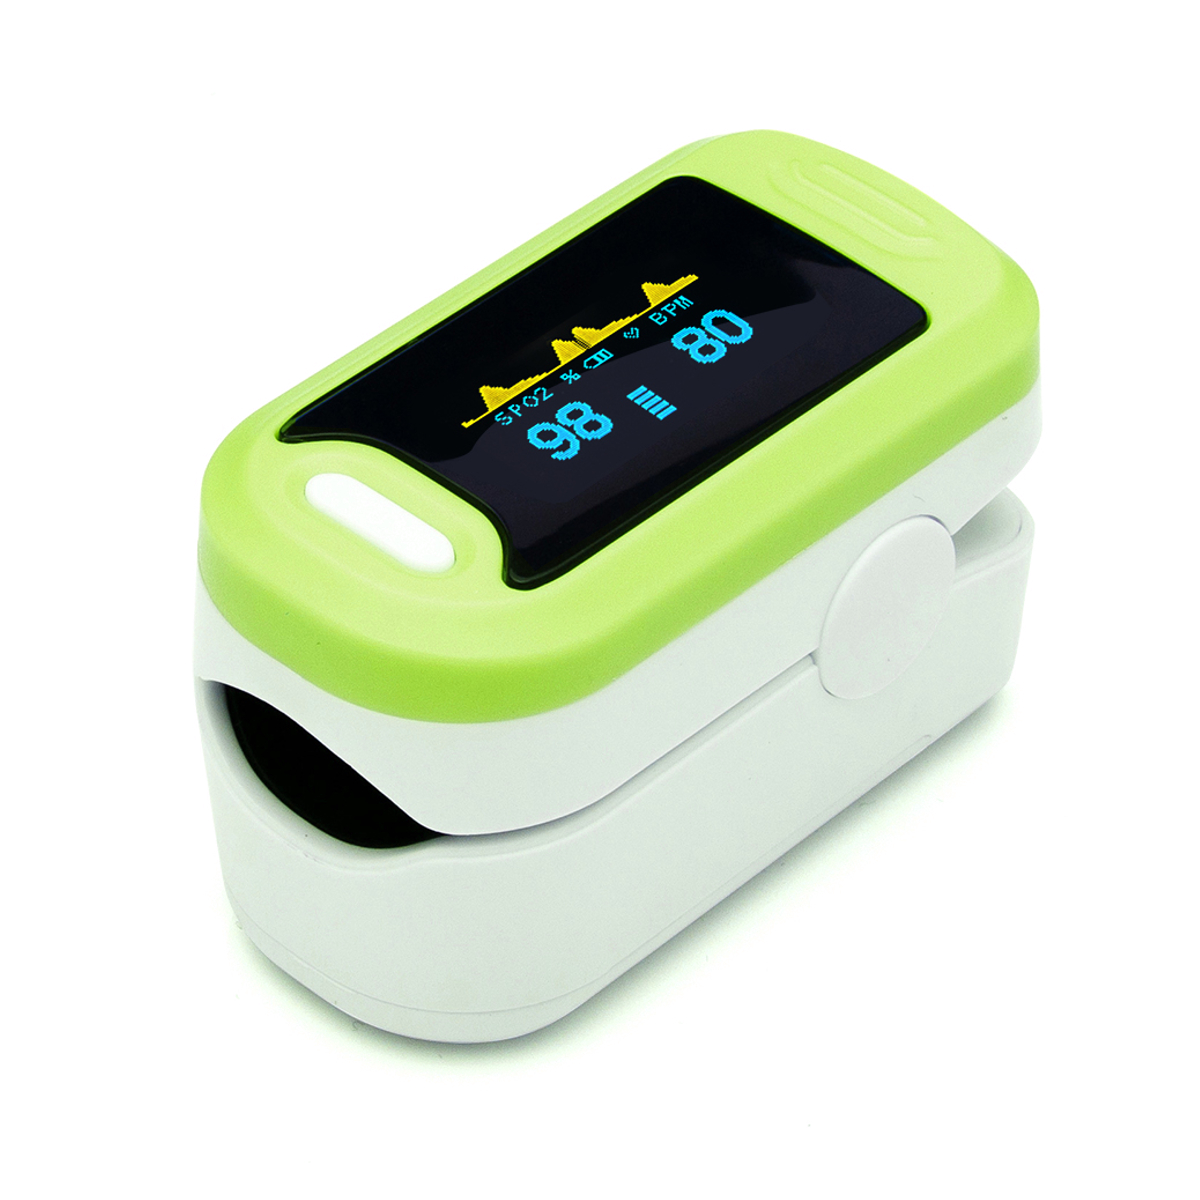 

OLED Display Fingertip Pulse Oximeter Pulse Oximeter Finger Oximetry SPO2 Blood Oxygen Saturation Monitor Heart Rate Monitor with Lanyard